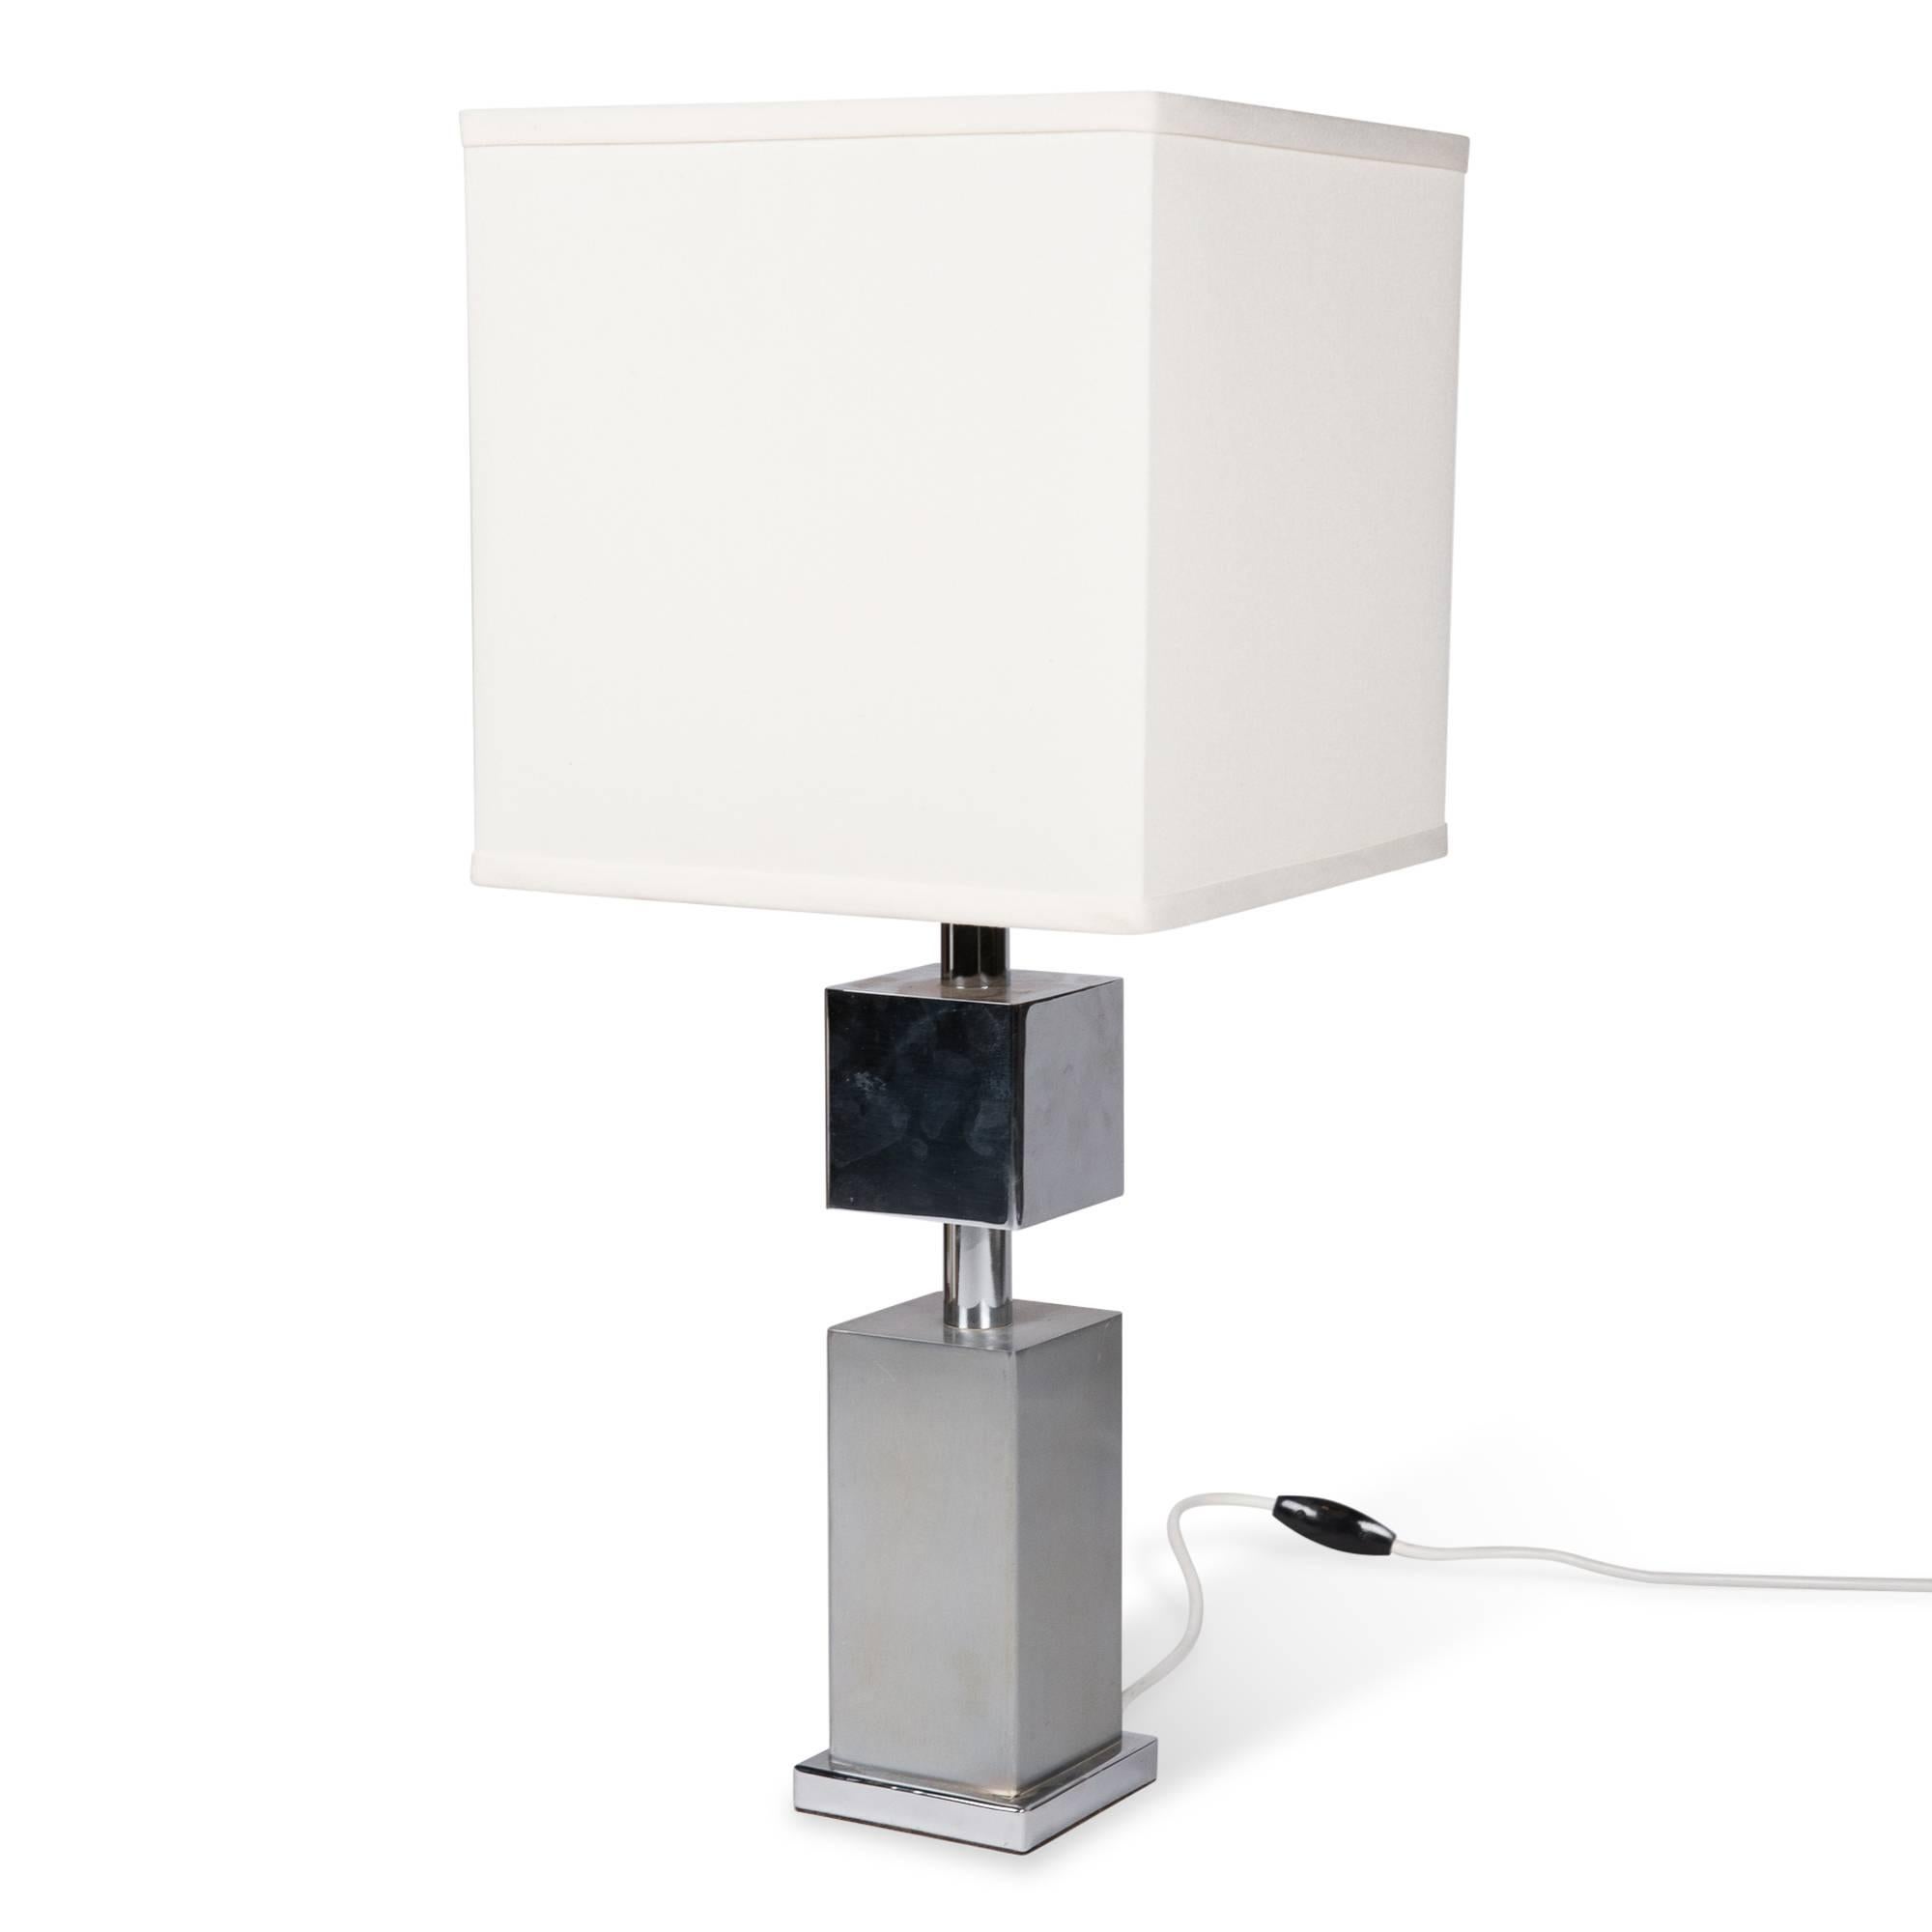 Late 20th Century Chrome Square Column Table Lamp, French, 1970s For Sale